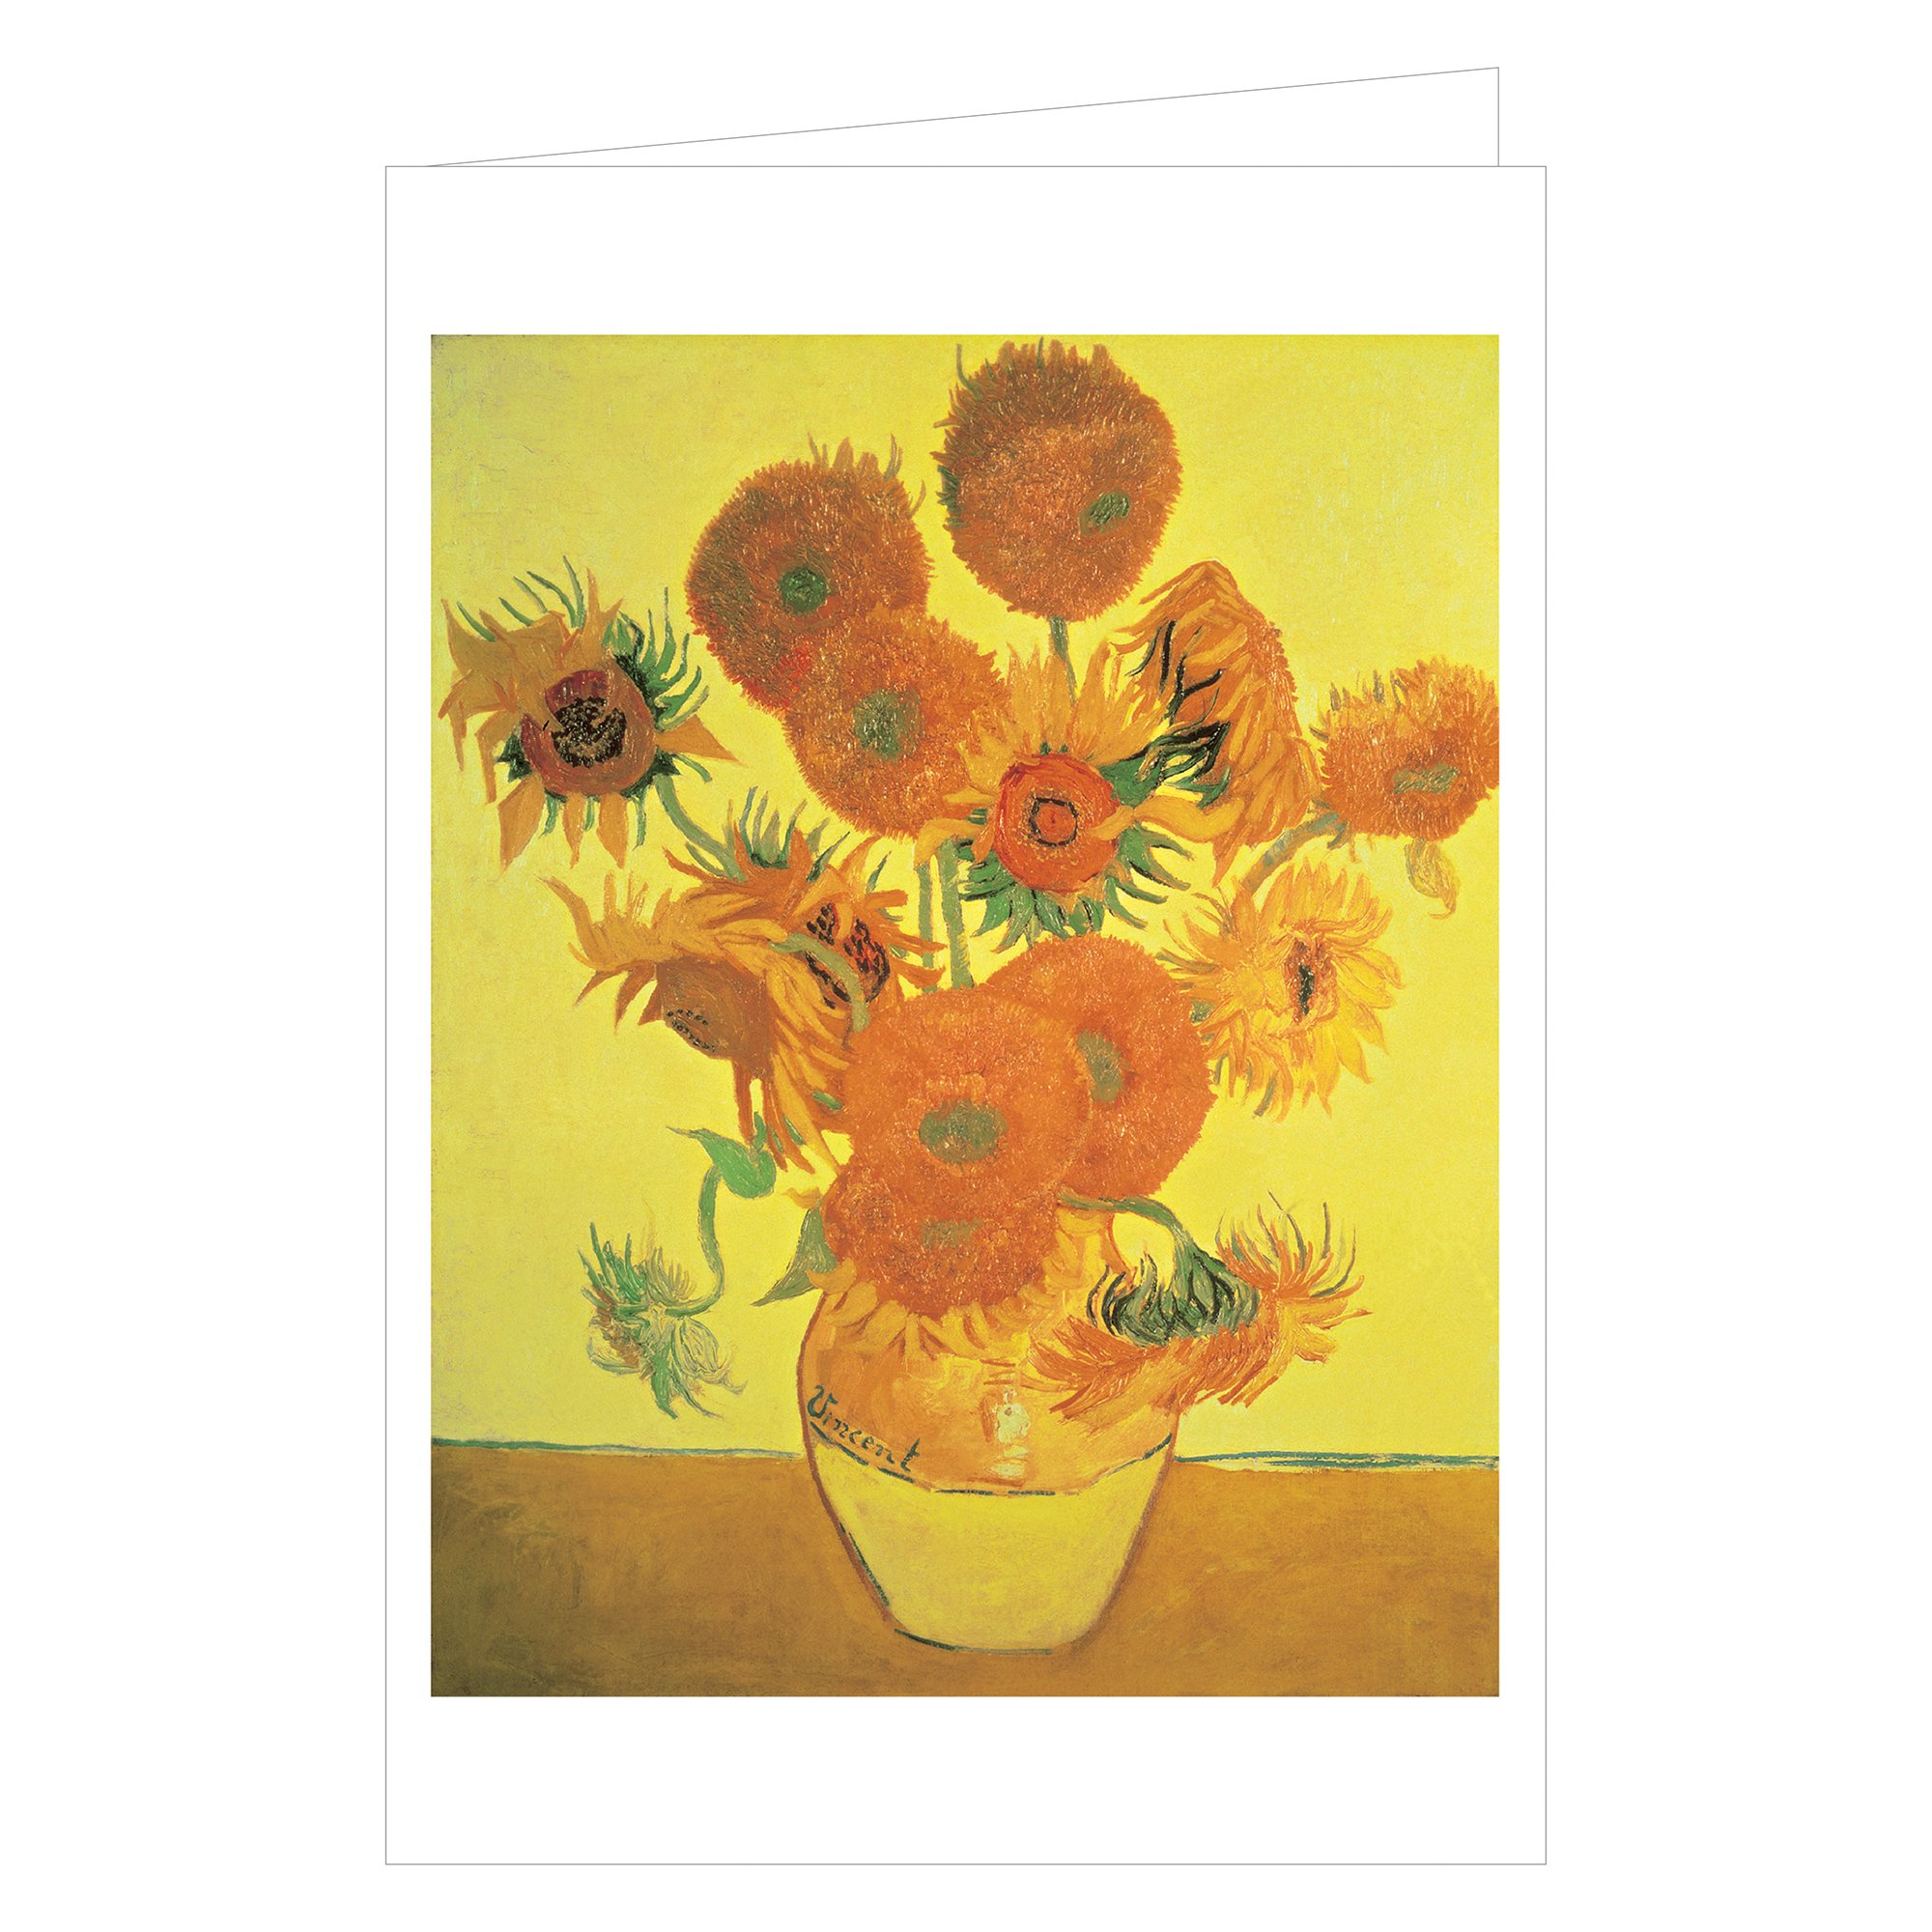 Vincent van Gogh's bright painting 'Sunflowers' to notecard box, by teNeues stationery.